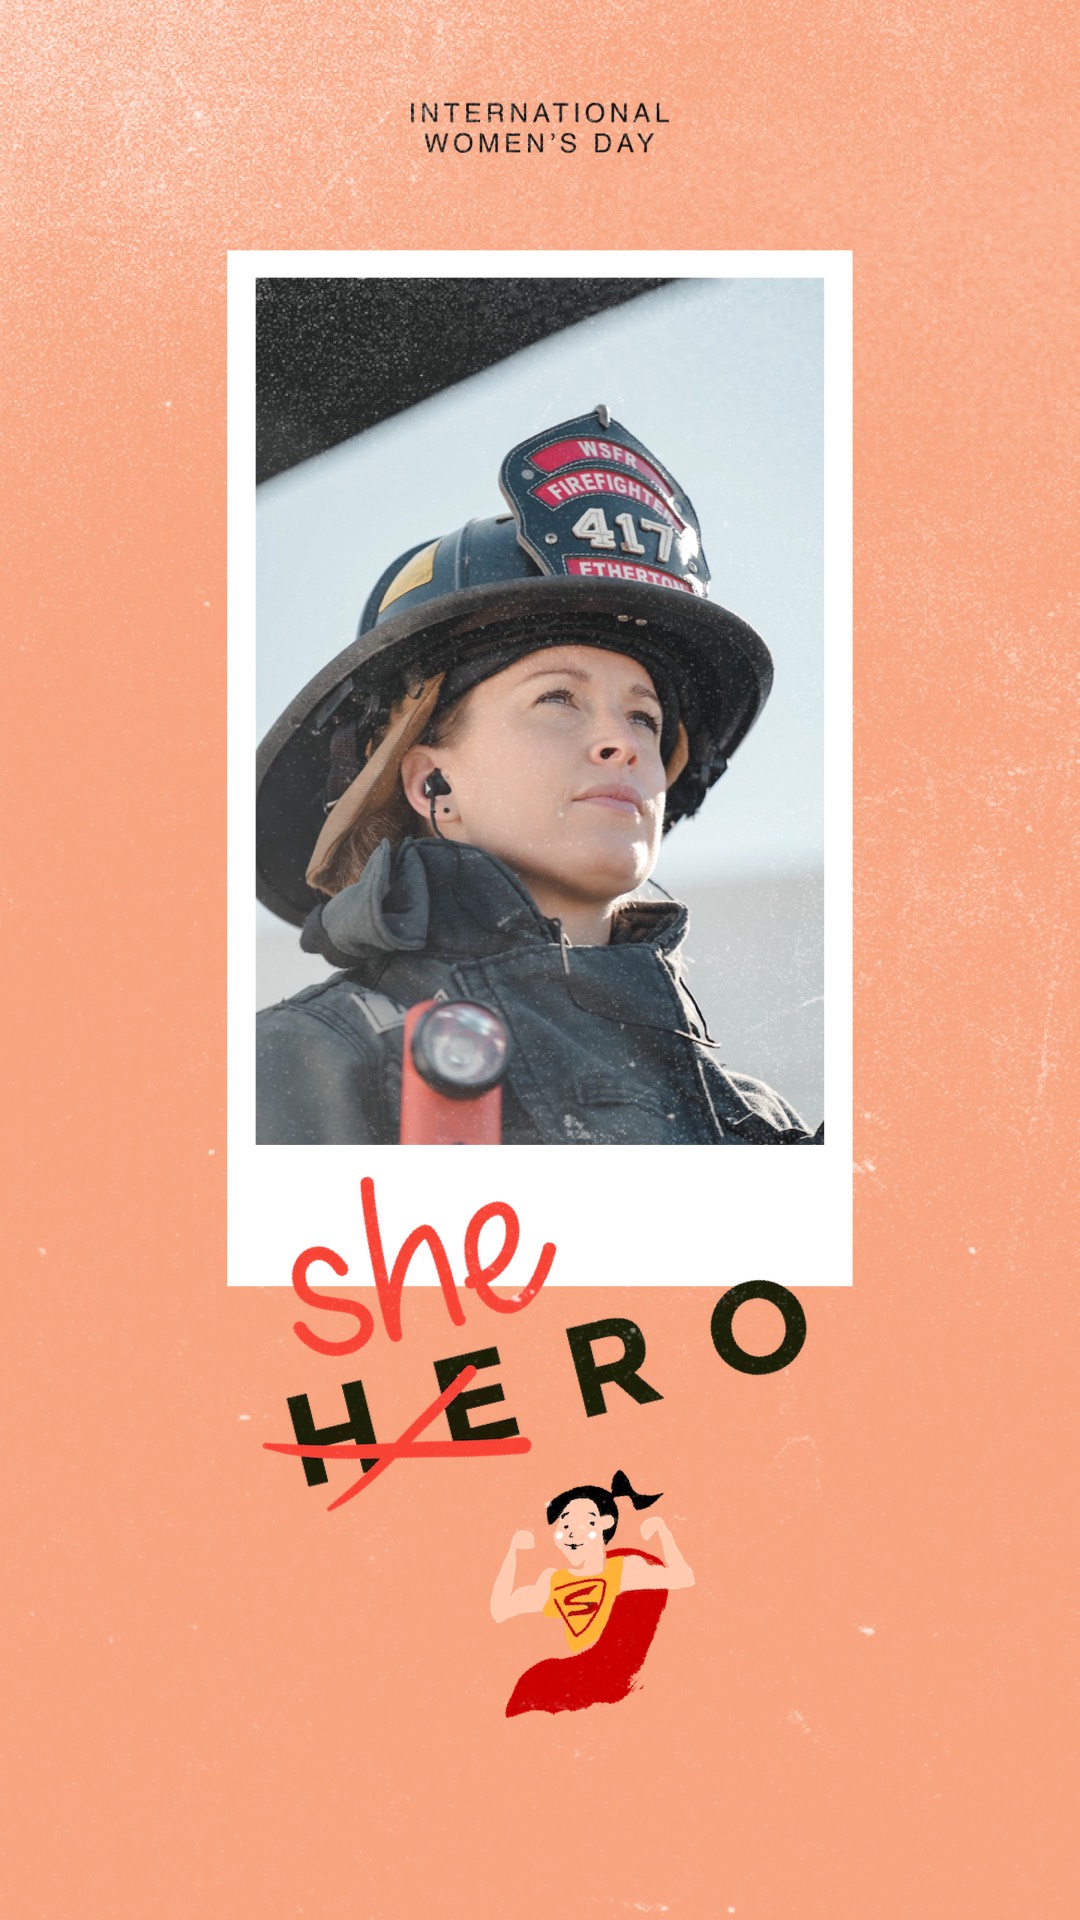 A Woman In A Fireman'S Uniform With A Fireman'S Hat Women S Day Template